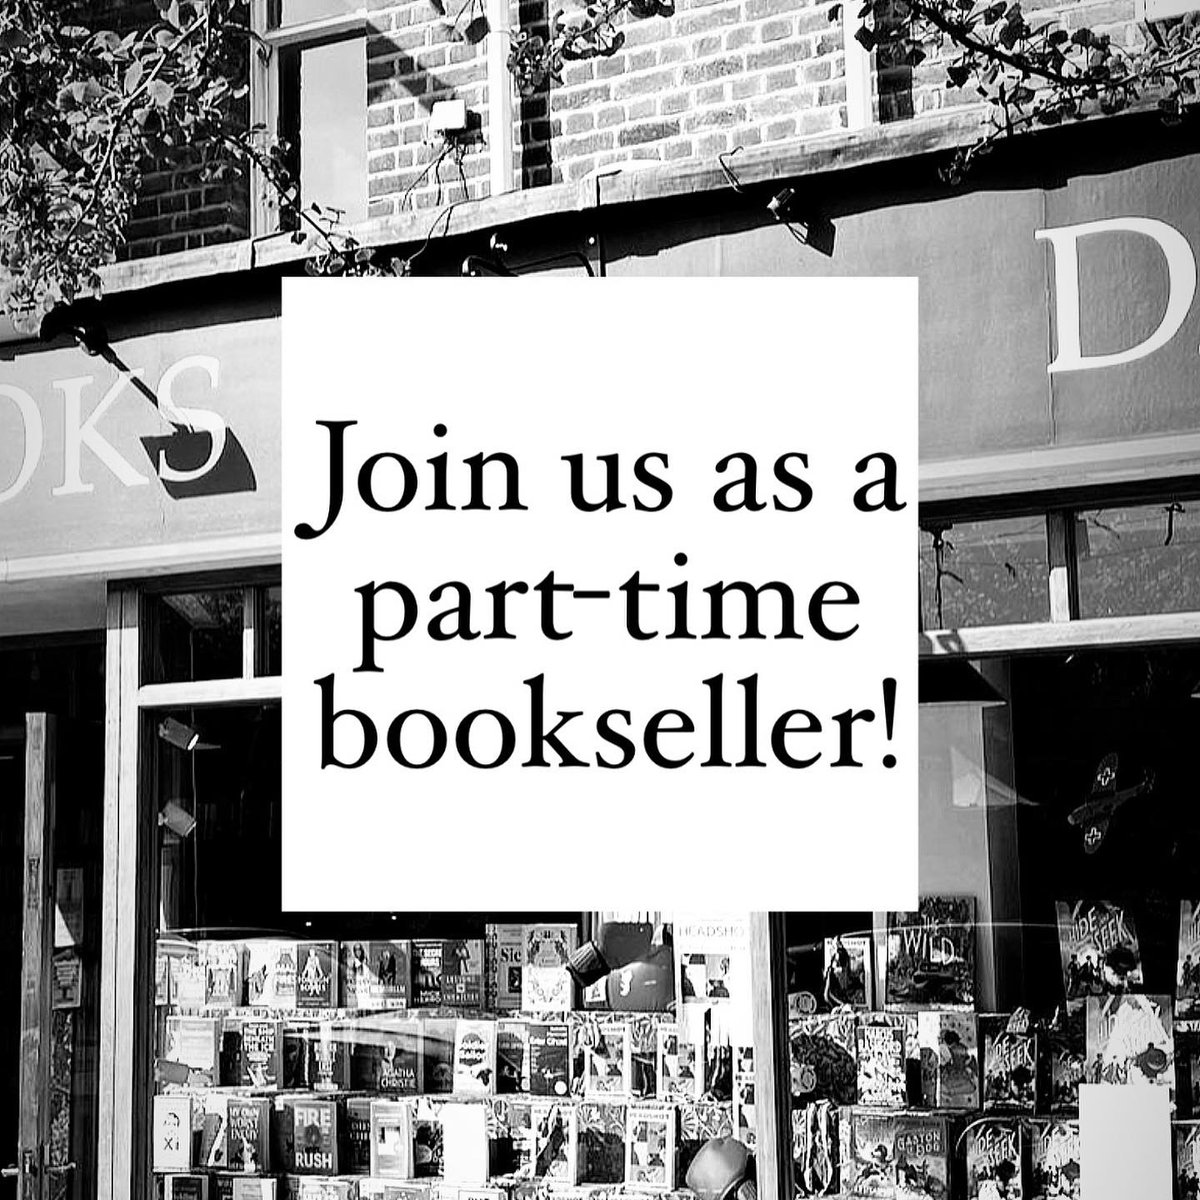 We're looking for a part-time bookseller to join us twice a week, Mondays and Saturdays, 9am-6pm, with flexibility for more days during busier periods across the year. Please email your CV and a covering letter to rebecca@dauntbooks.co.uk, more info here: instagram.com/p/C6GLZ5JLJnZ/